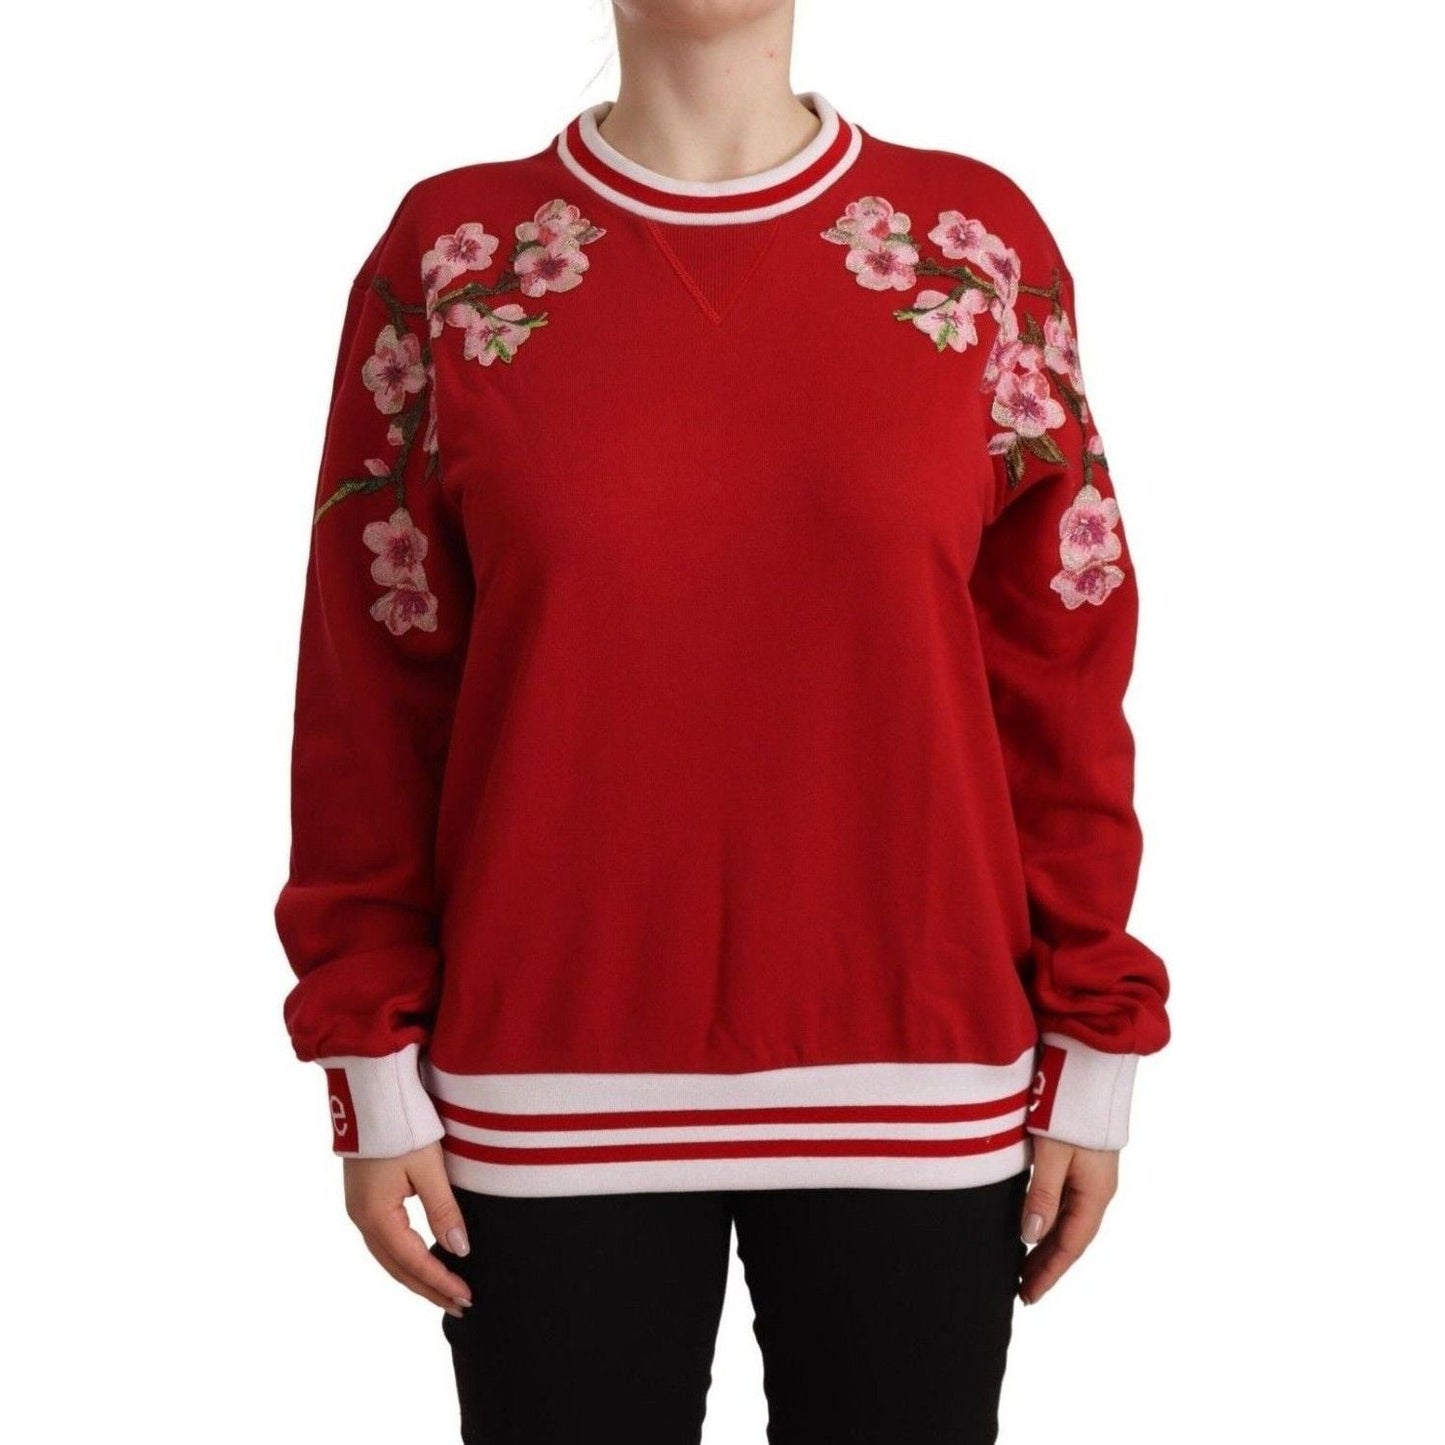 Dolce & Gabbana Elegant Red Crewneck Pullover with Floral Motif WOMAN SWEATERS red-cotton-crewneck-dglove-pullover-sweater s-l1600-21-8ae6e99c-2a6.jpg